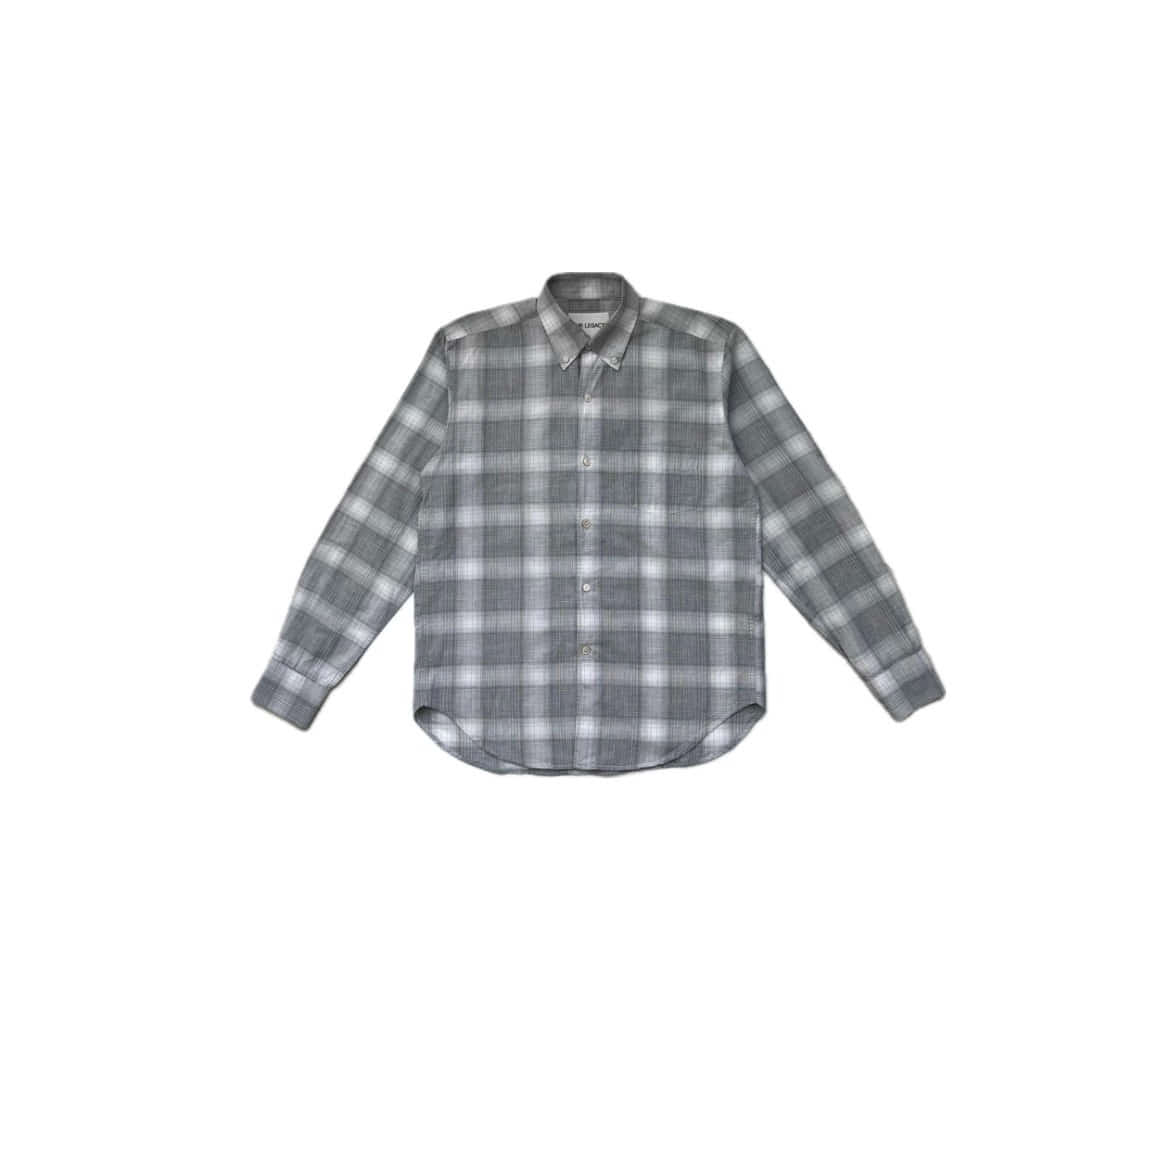 Our Legacy Check Shirt